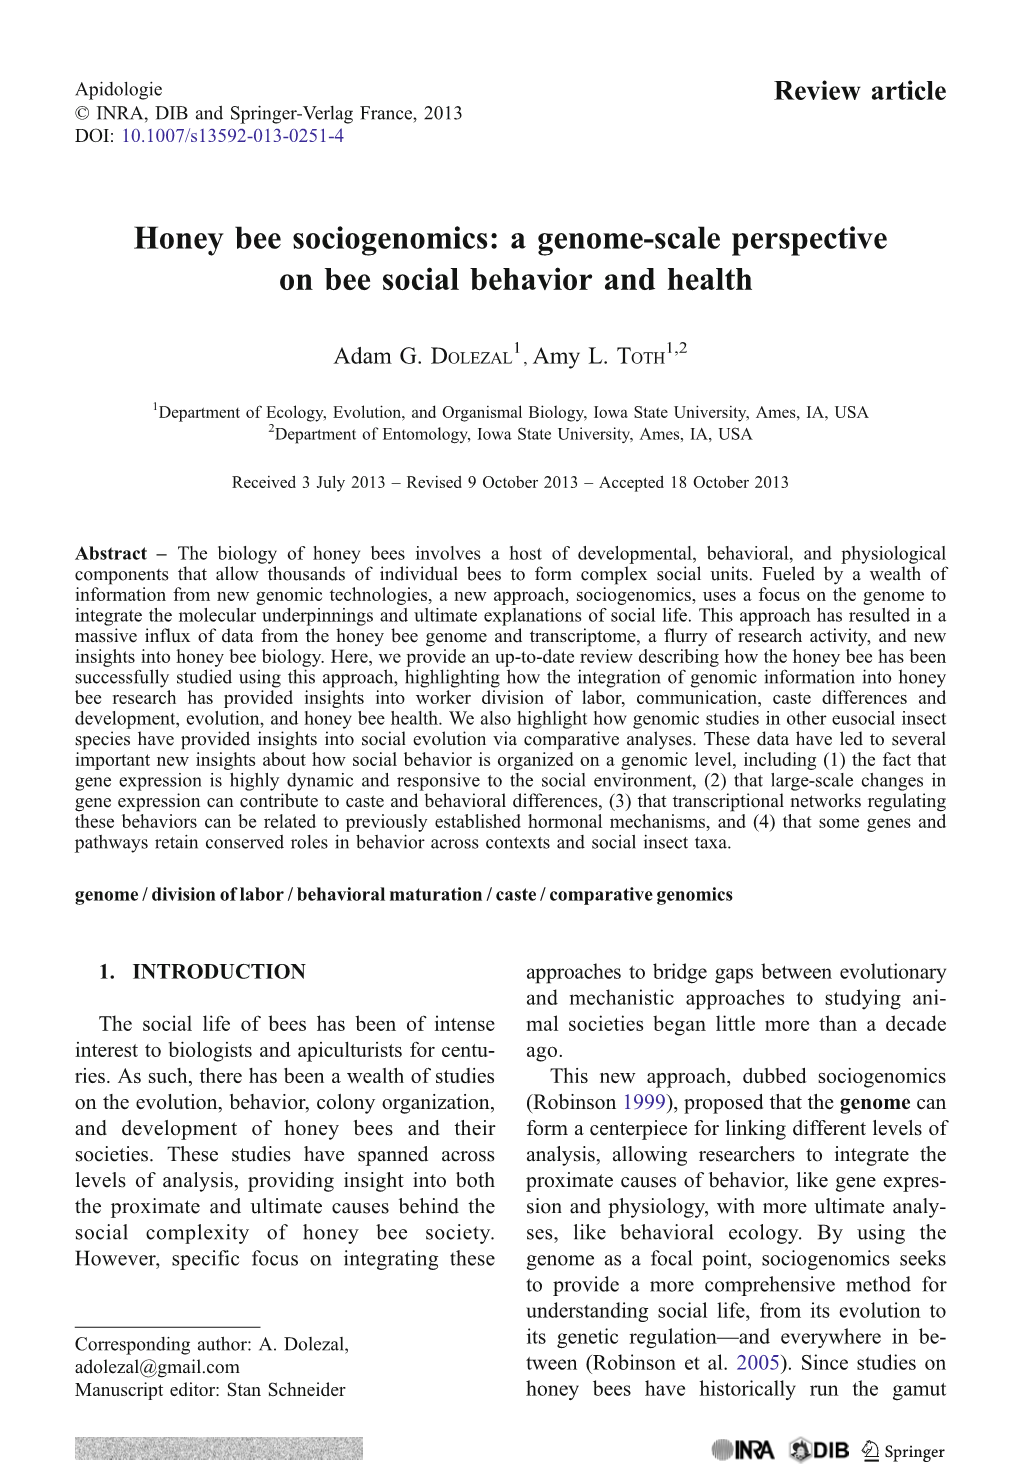 Honey Bee Sociogenomics: a Genome-Scale Perspective on Bee Social Behavior and Health